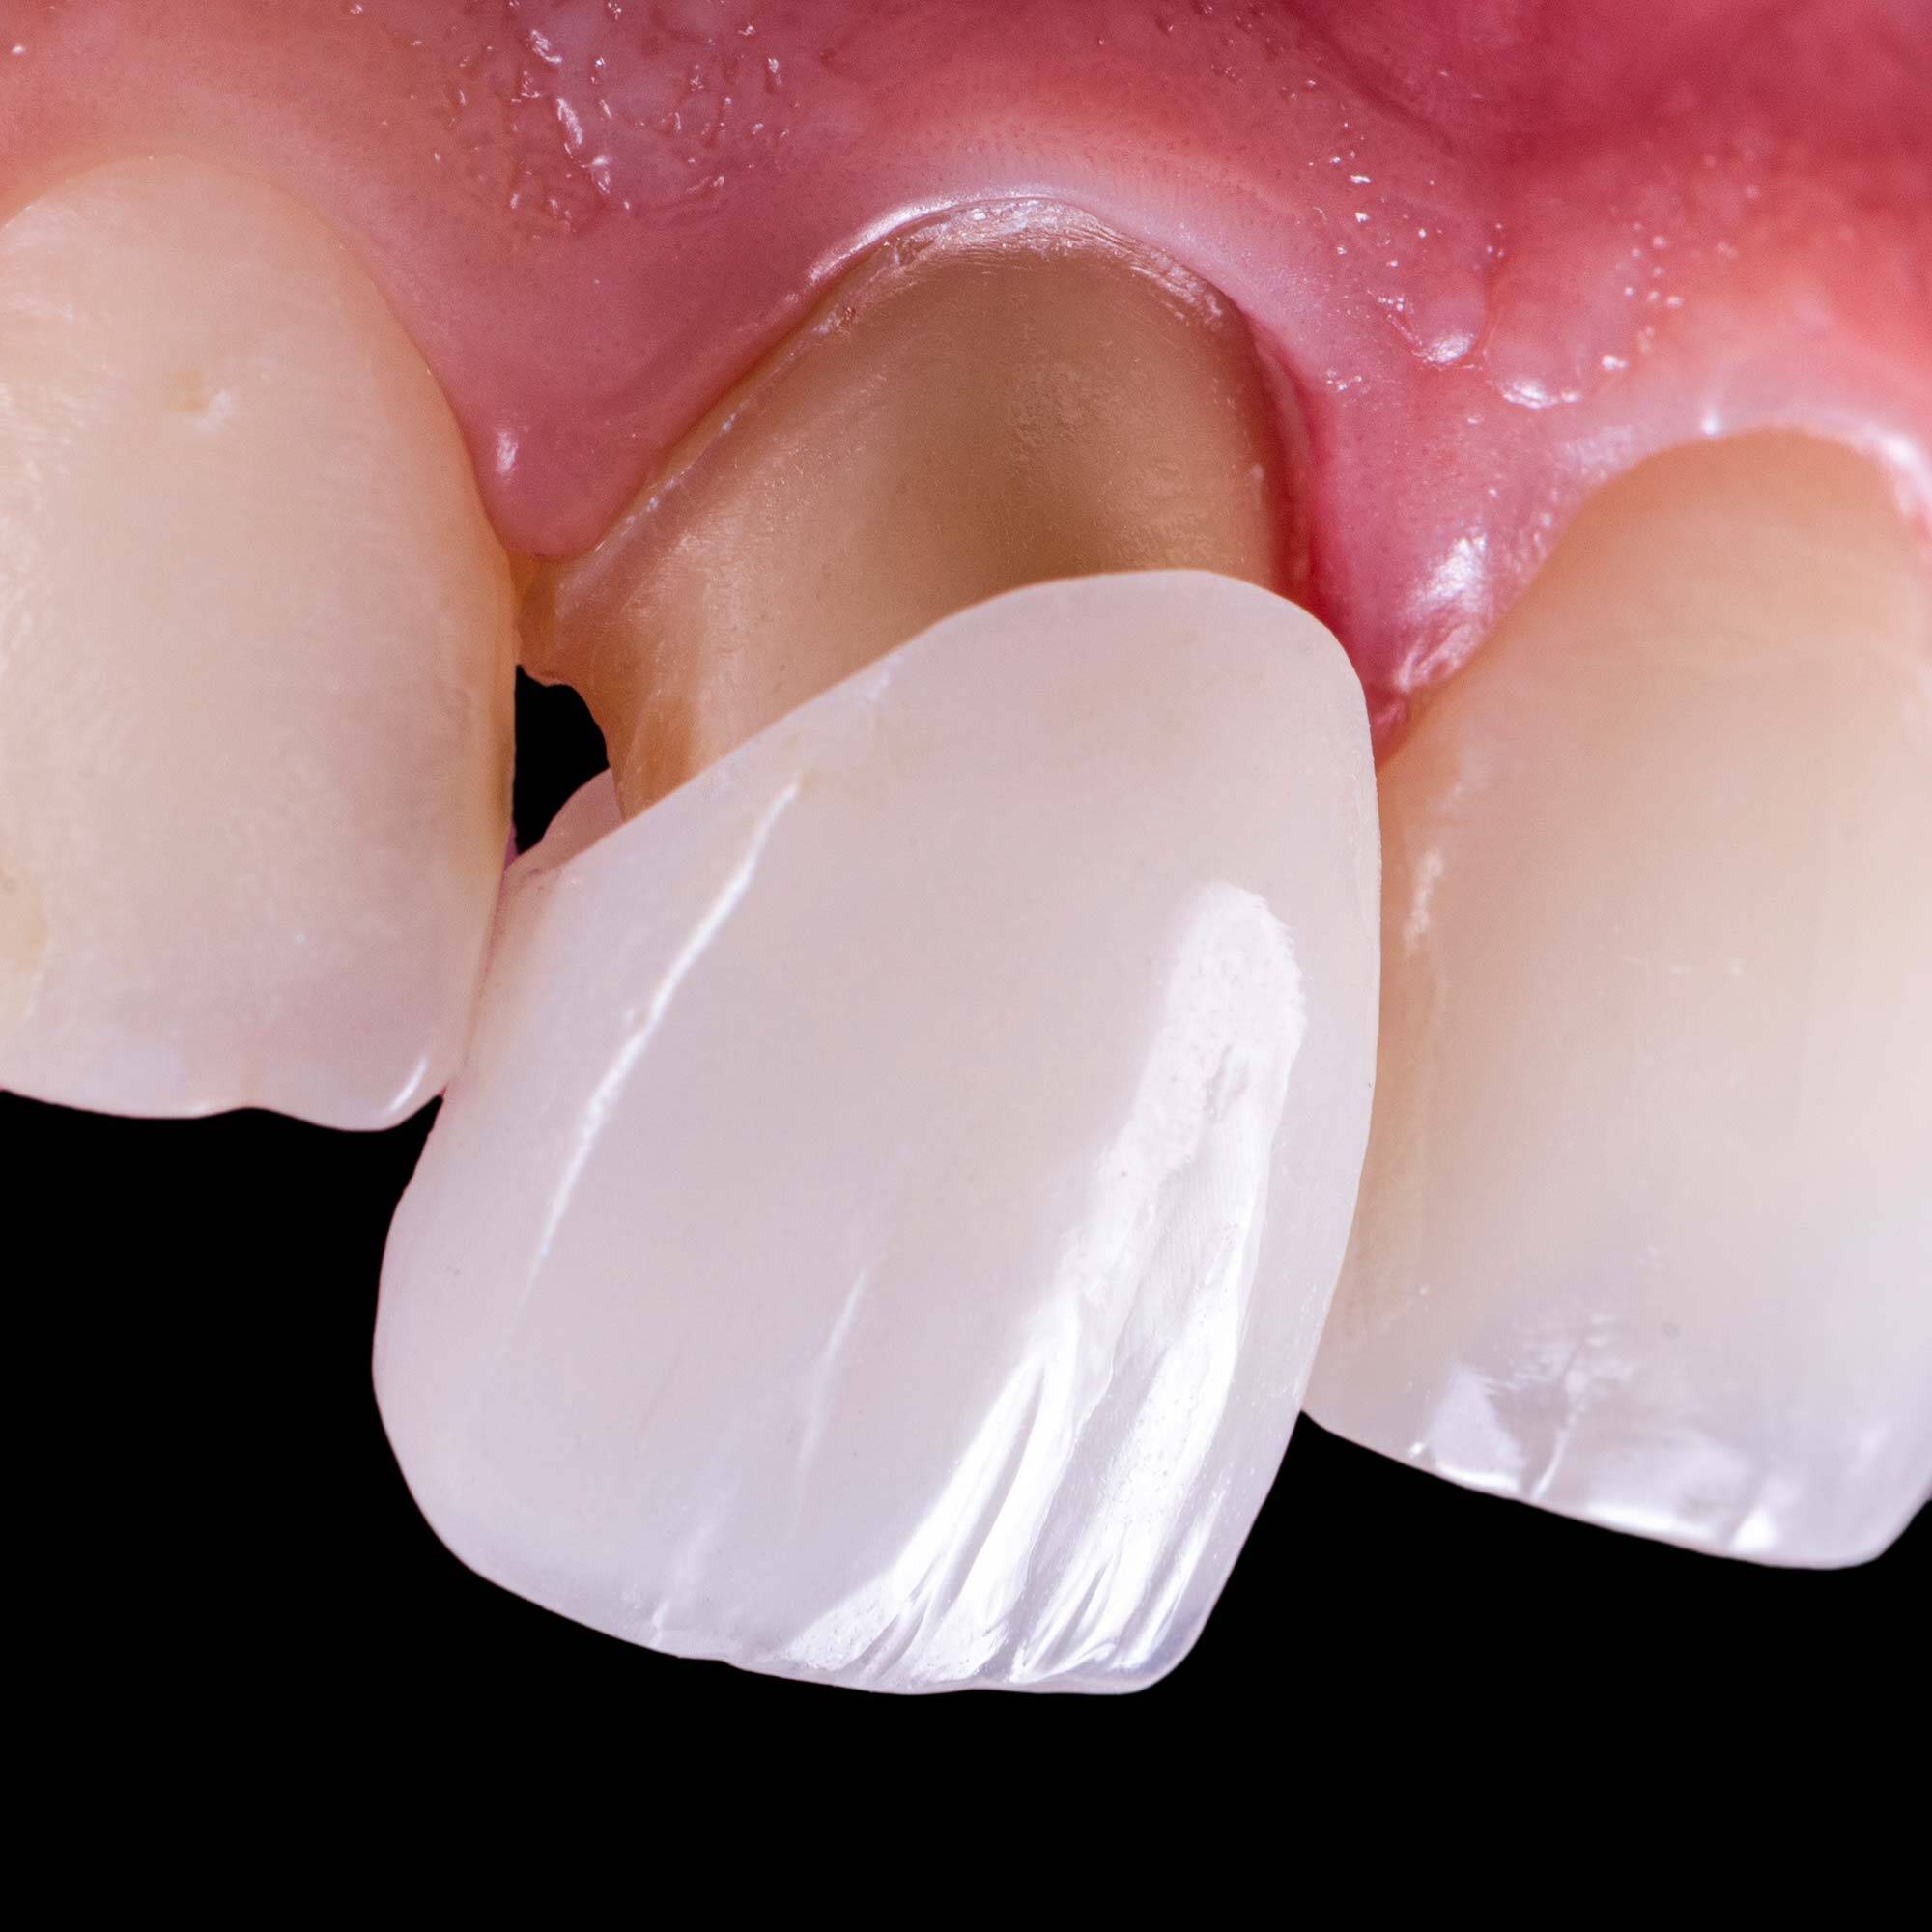 Tooth Decay underneath Crowns and Bridges